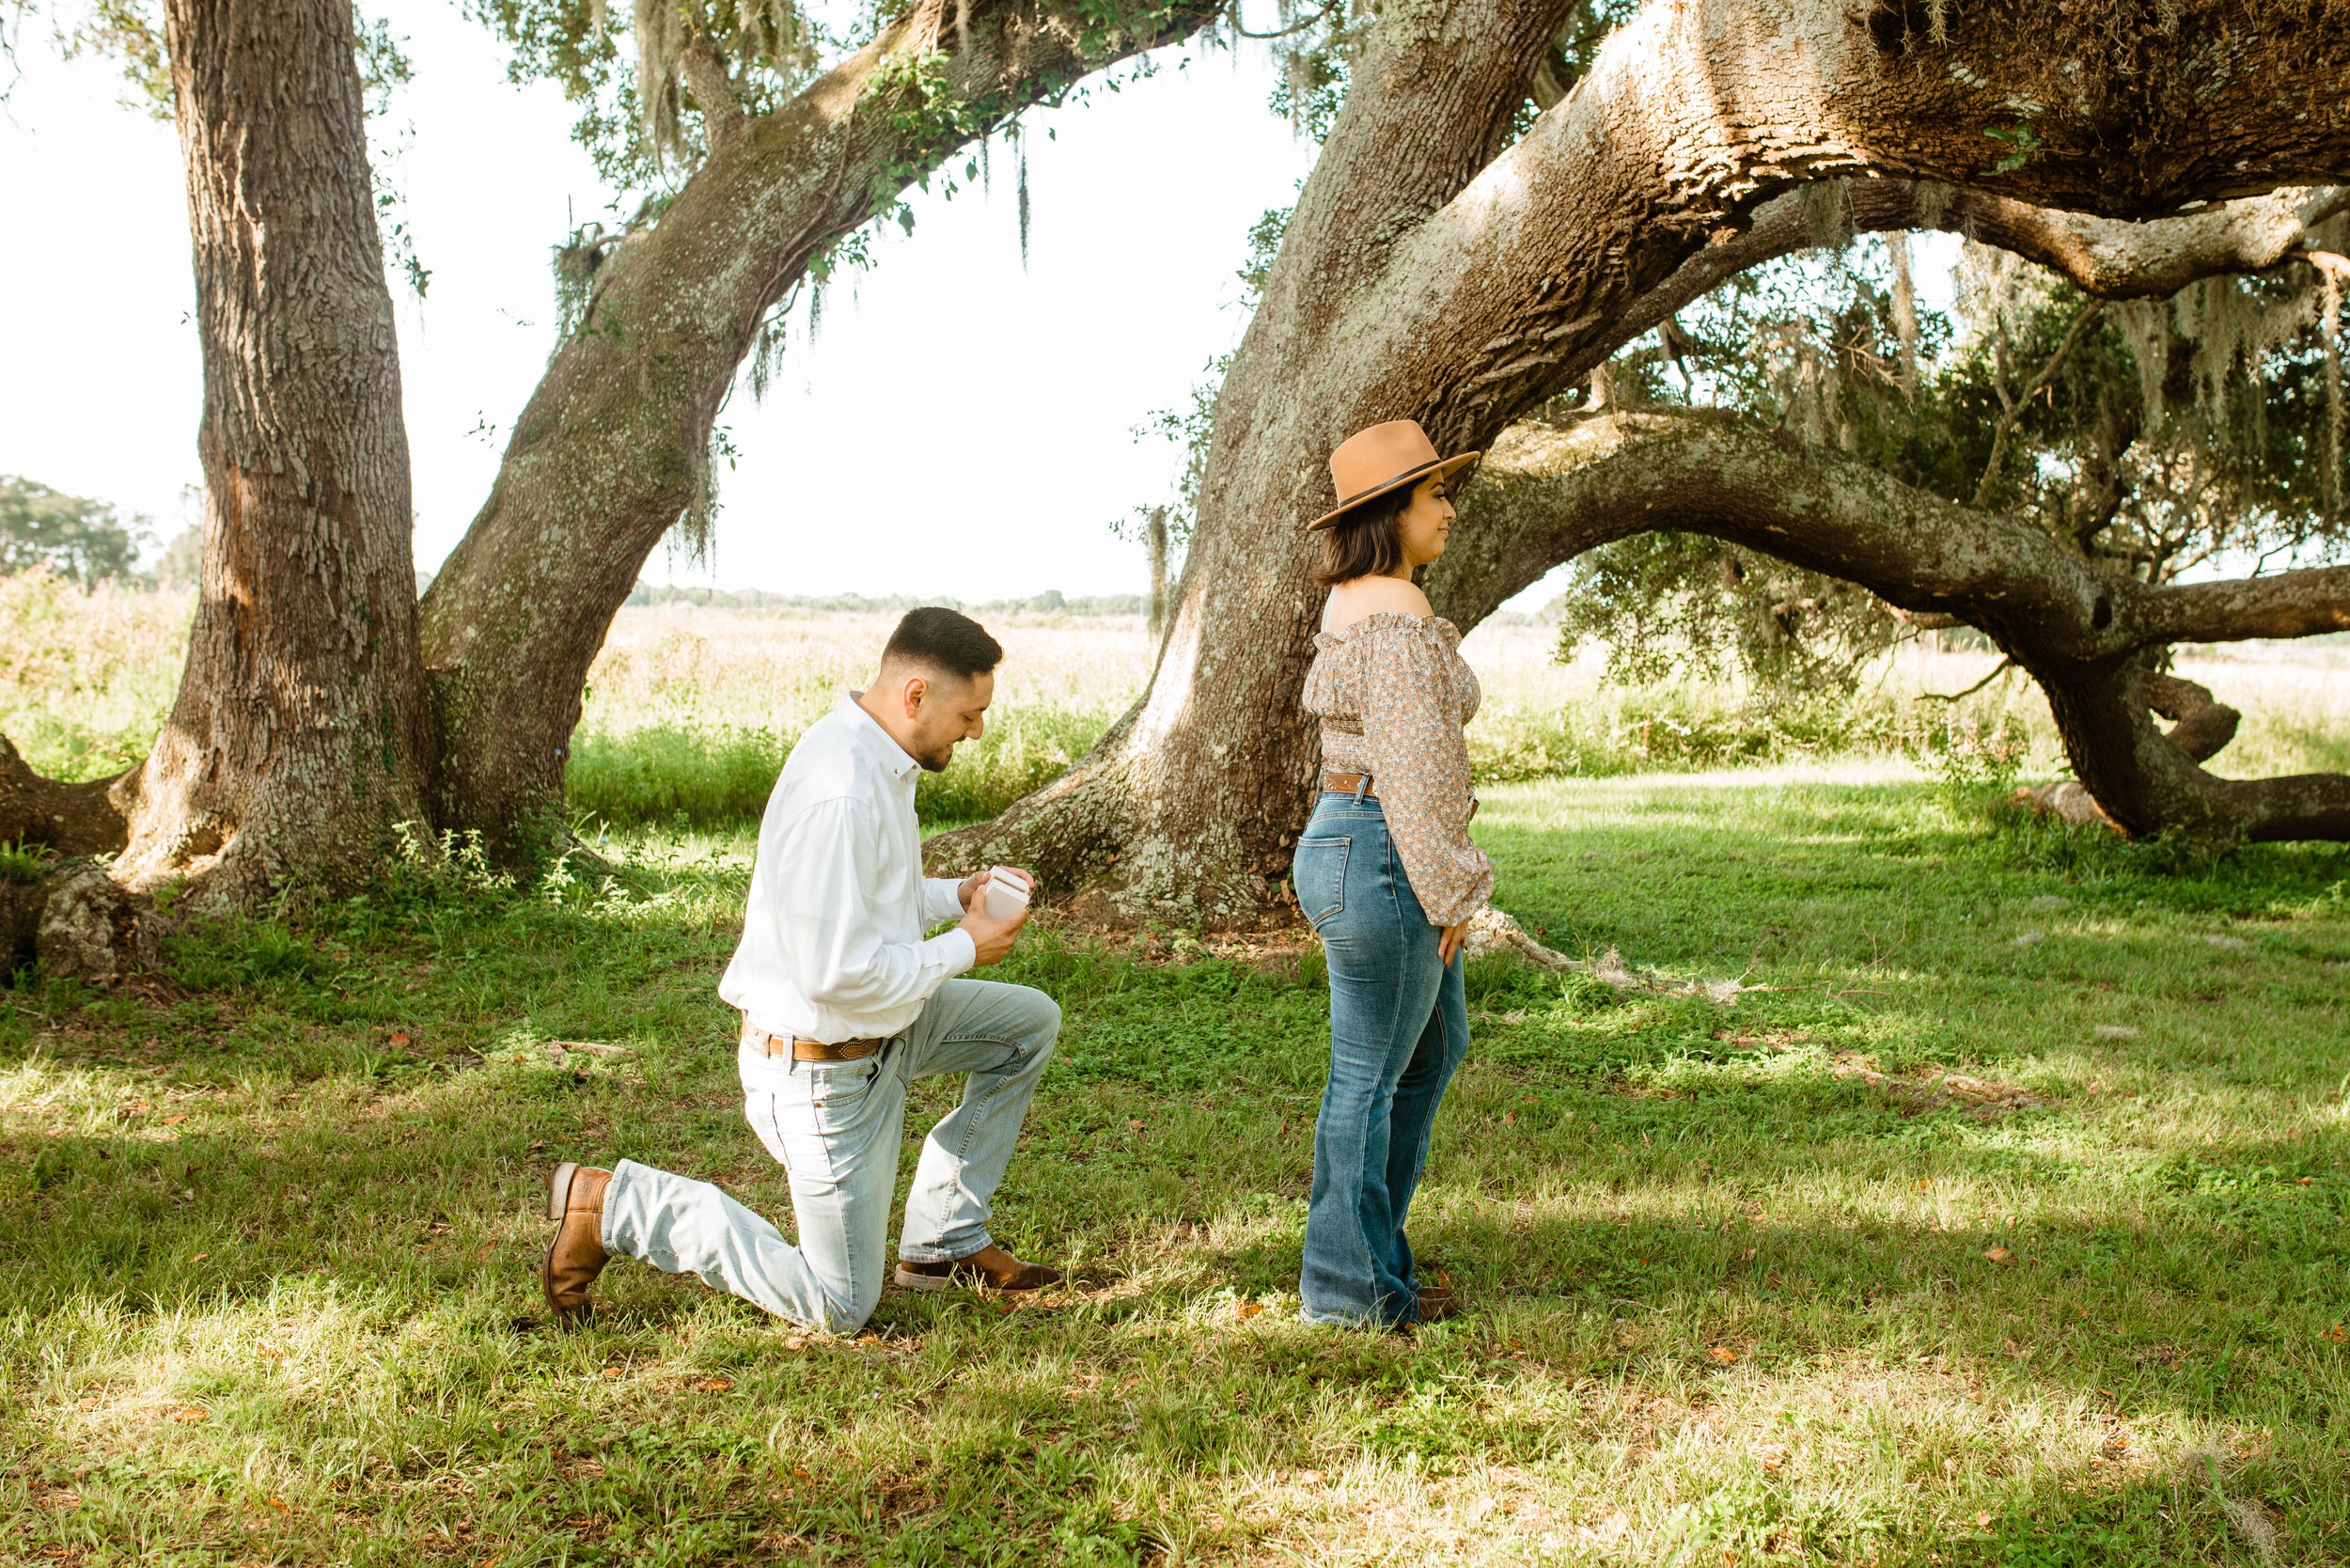 Surprise proposal photos in the Houston area photographed by J. Andrade Visual Arts